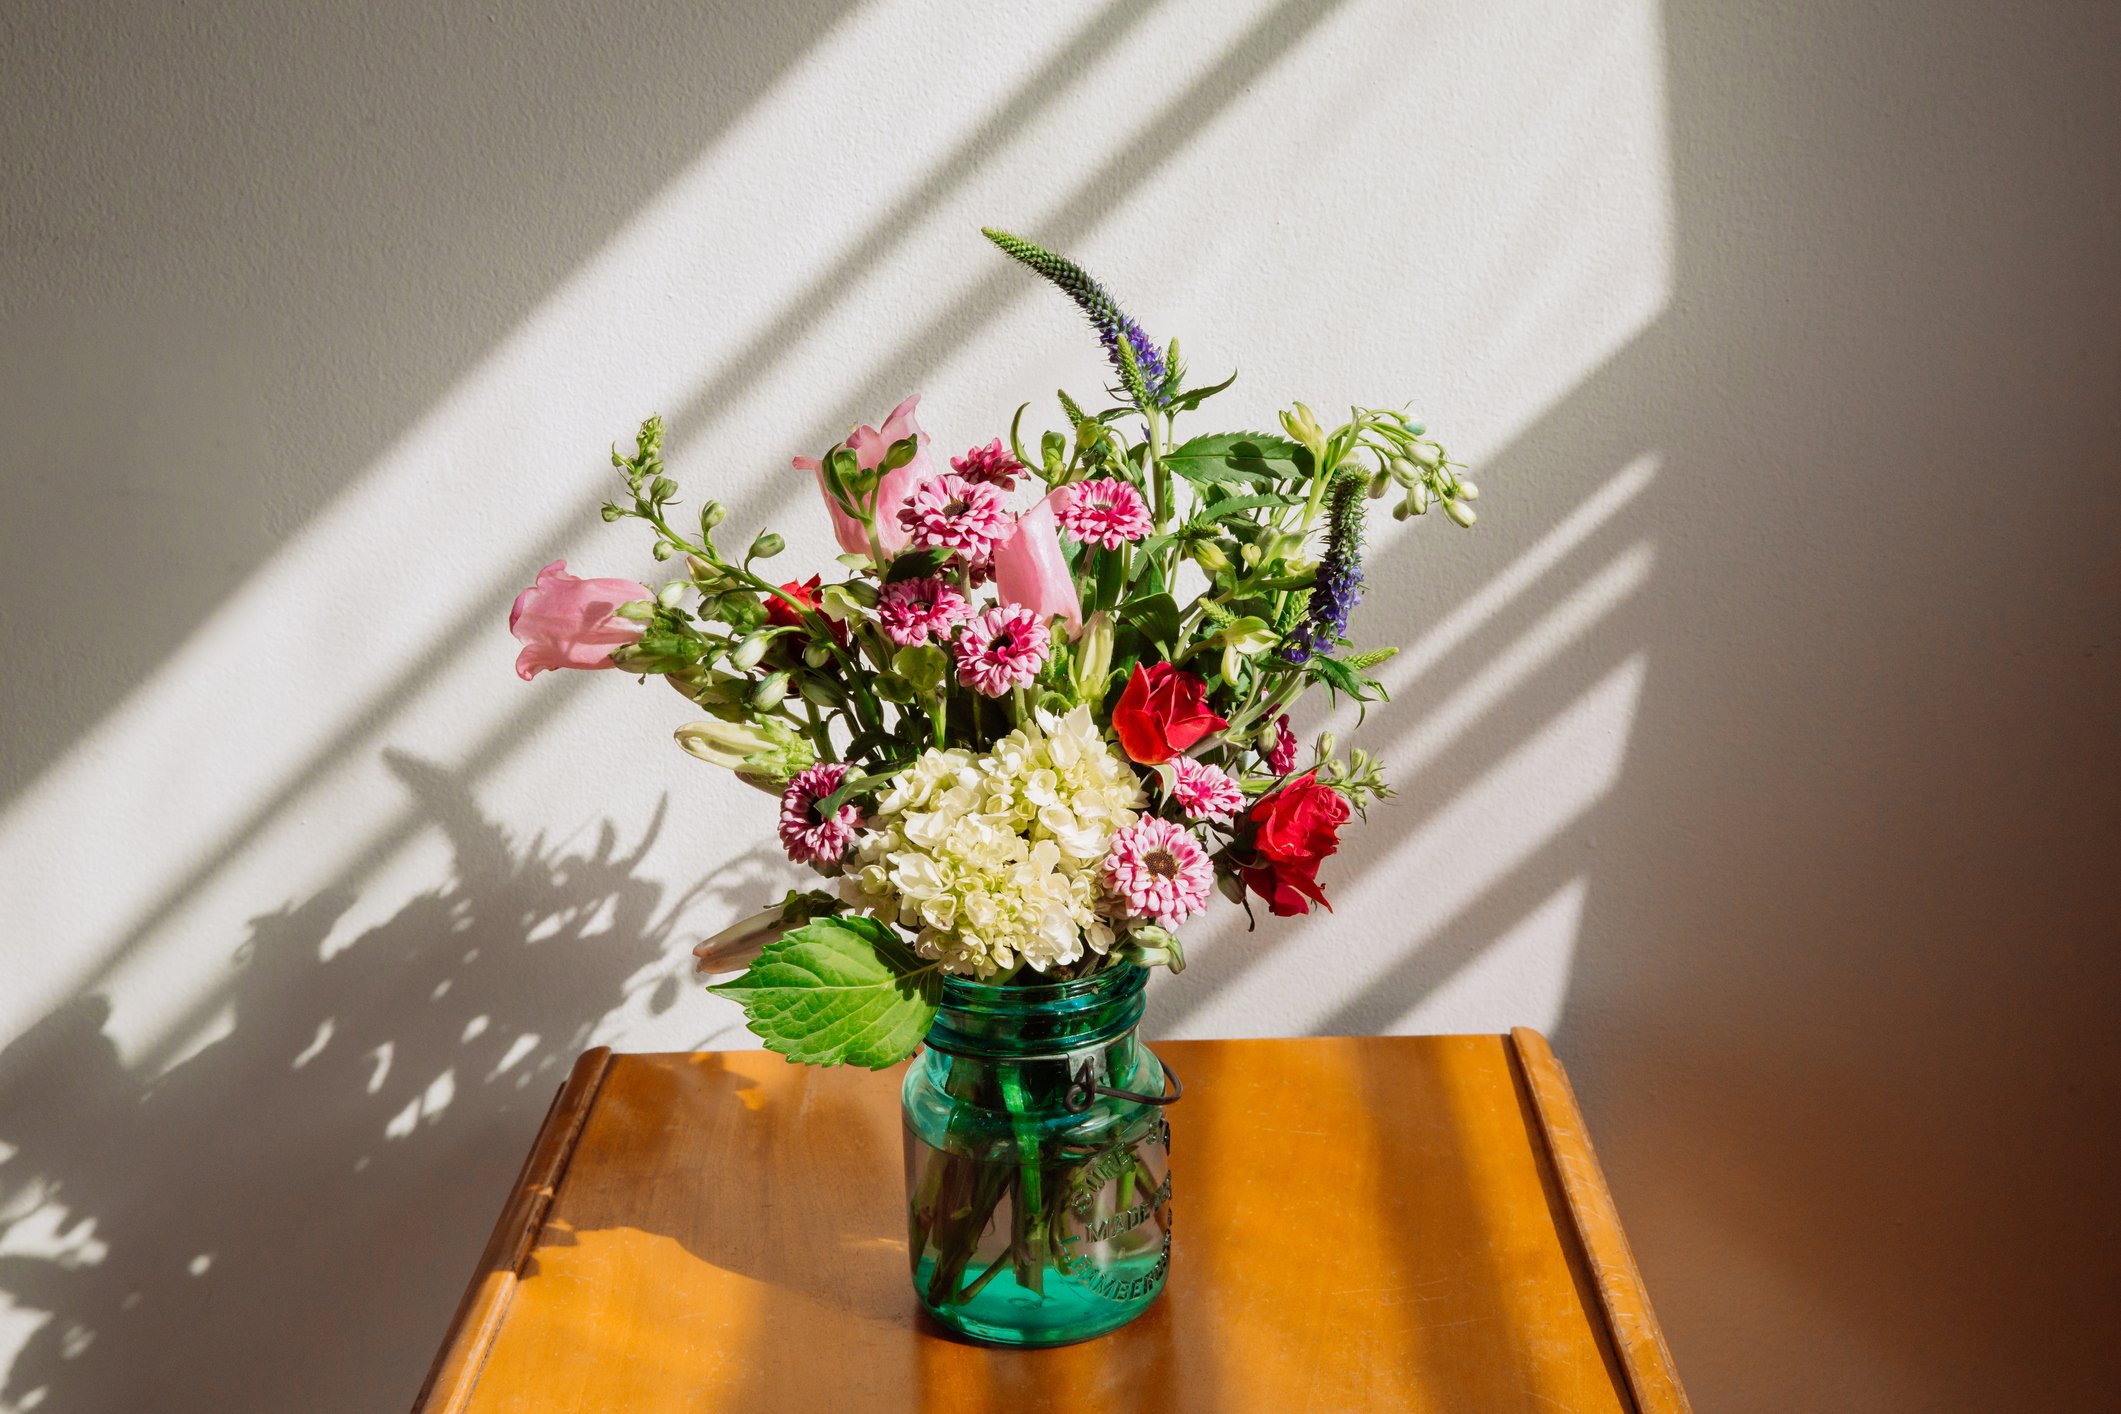 A picture of a beautiful flower vase arranged in a farmhouse style. | Photo: Getty Images